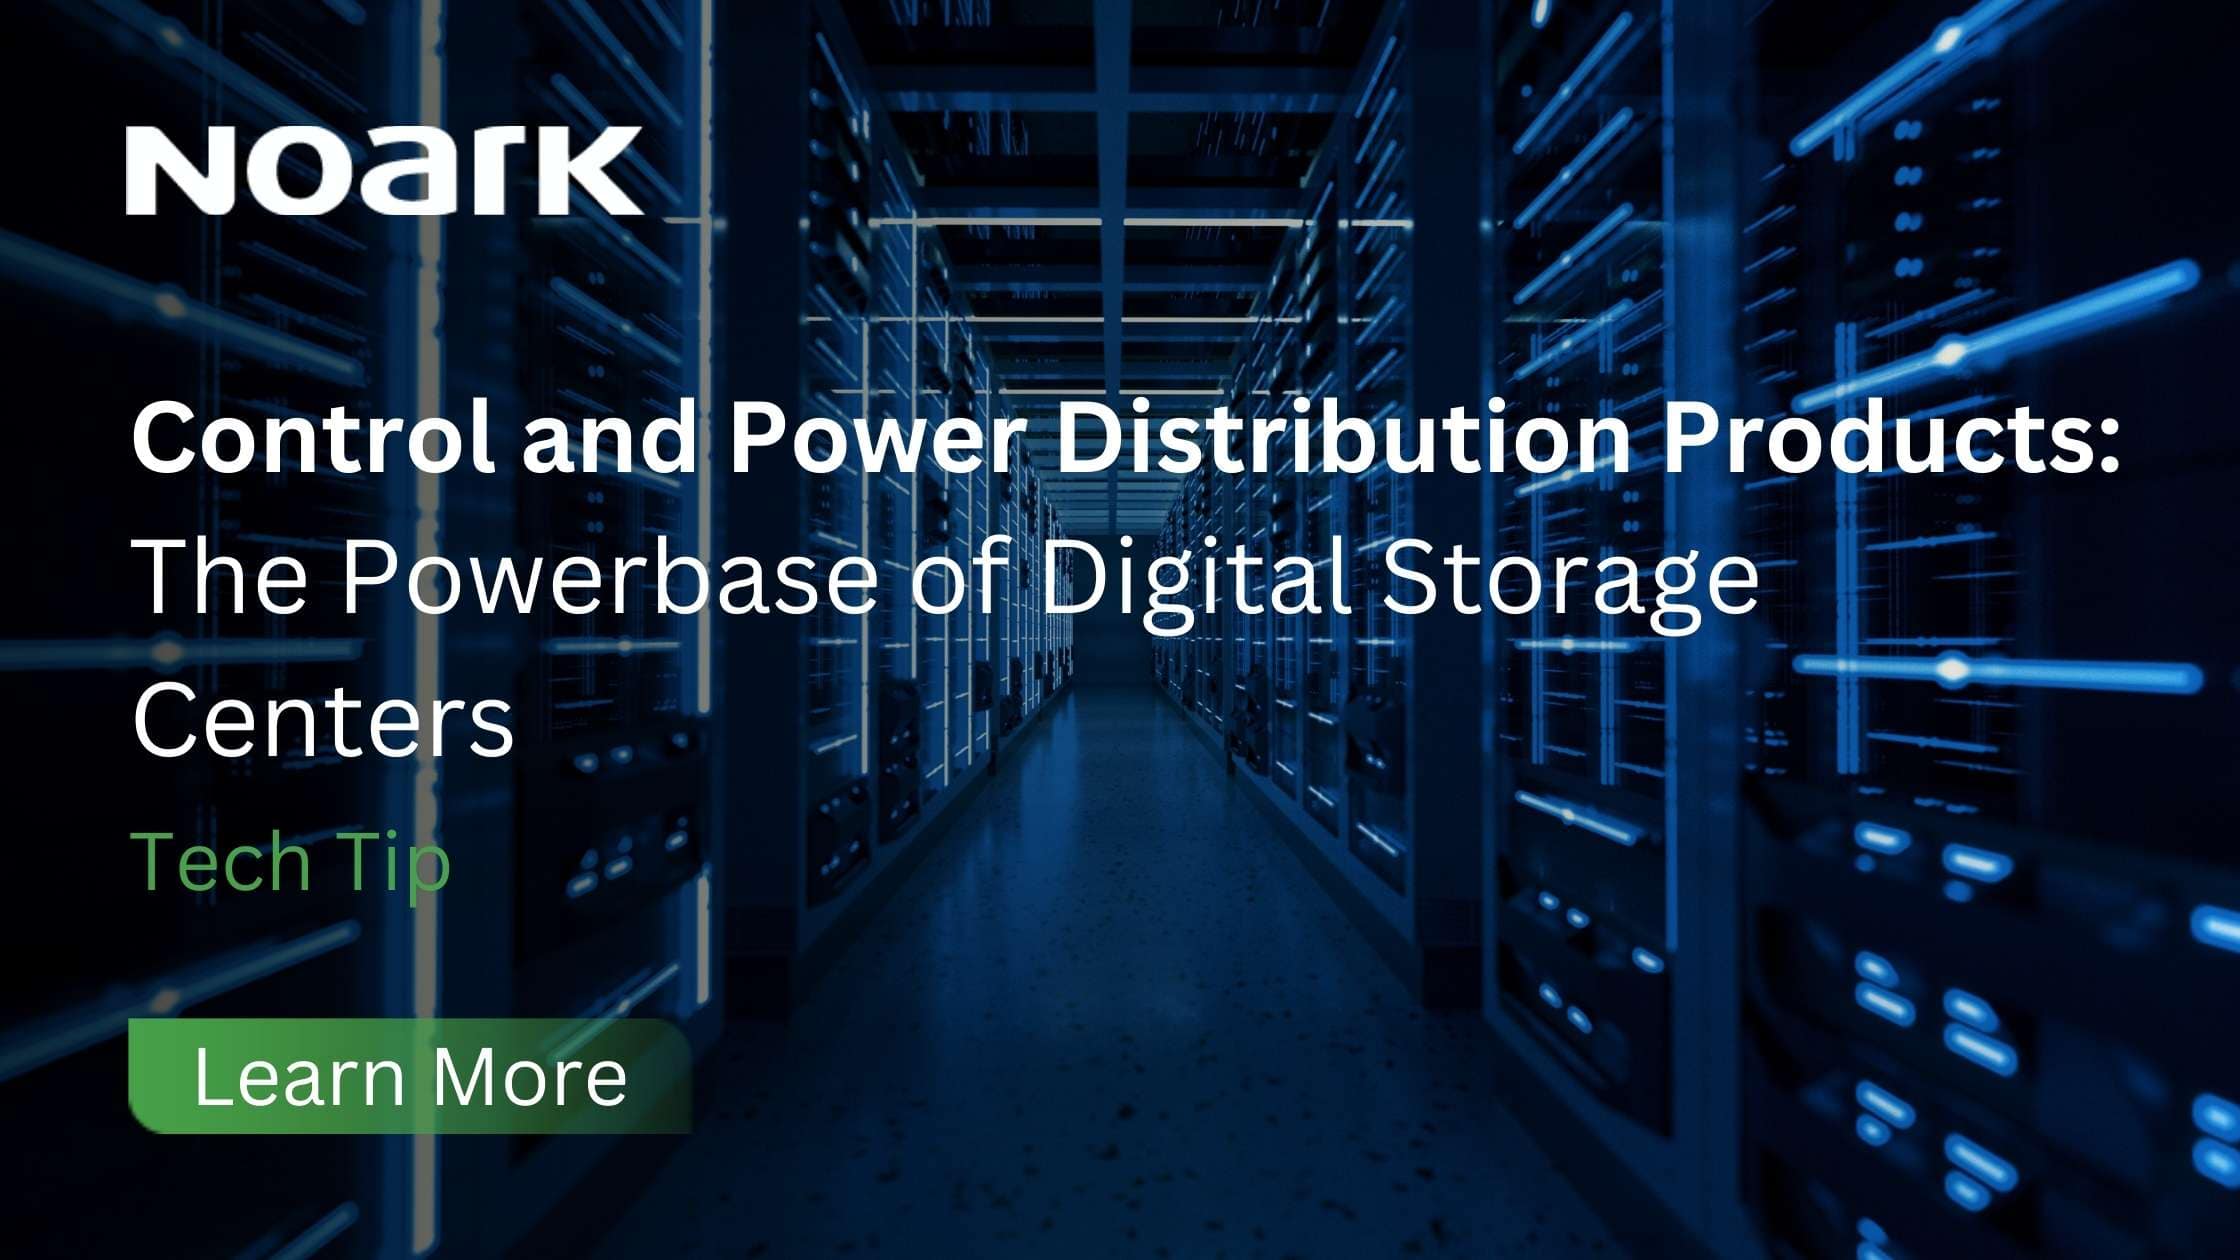 Control and Power Distribution Products: The Powerbase of Digital Storage Centers